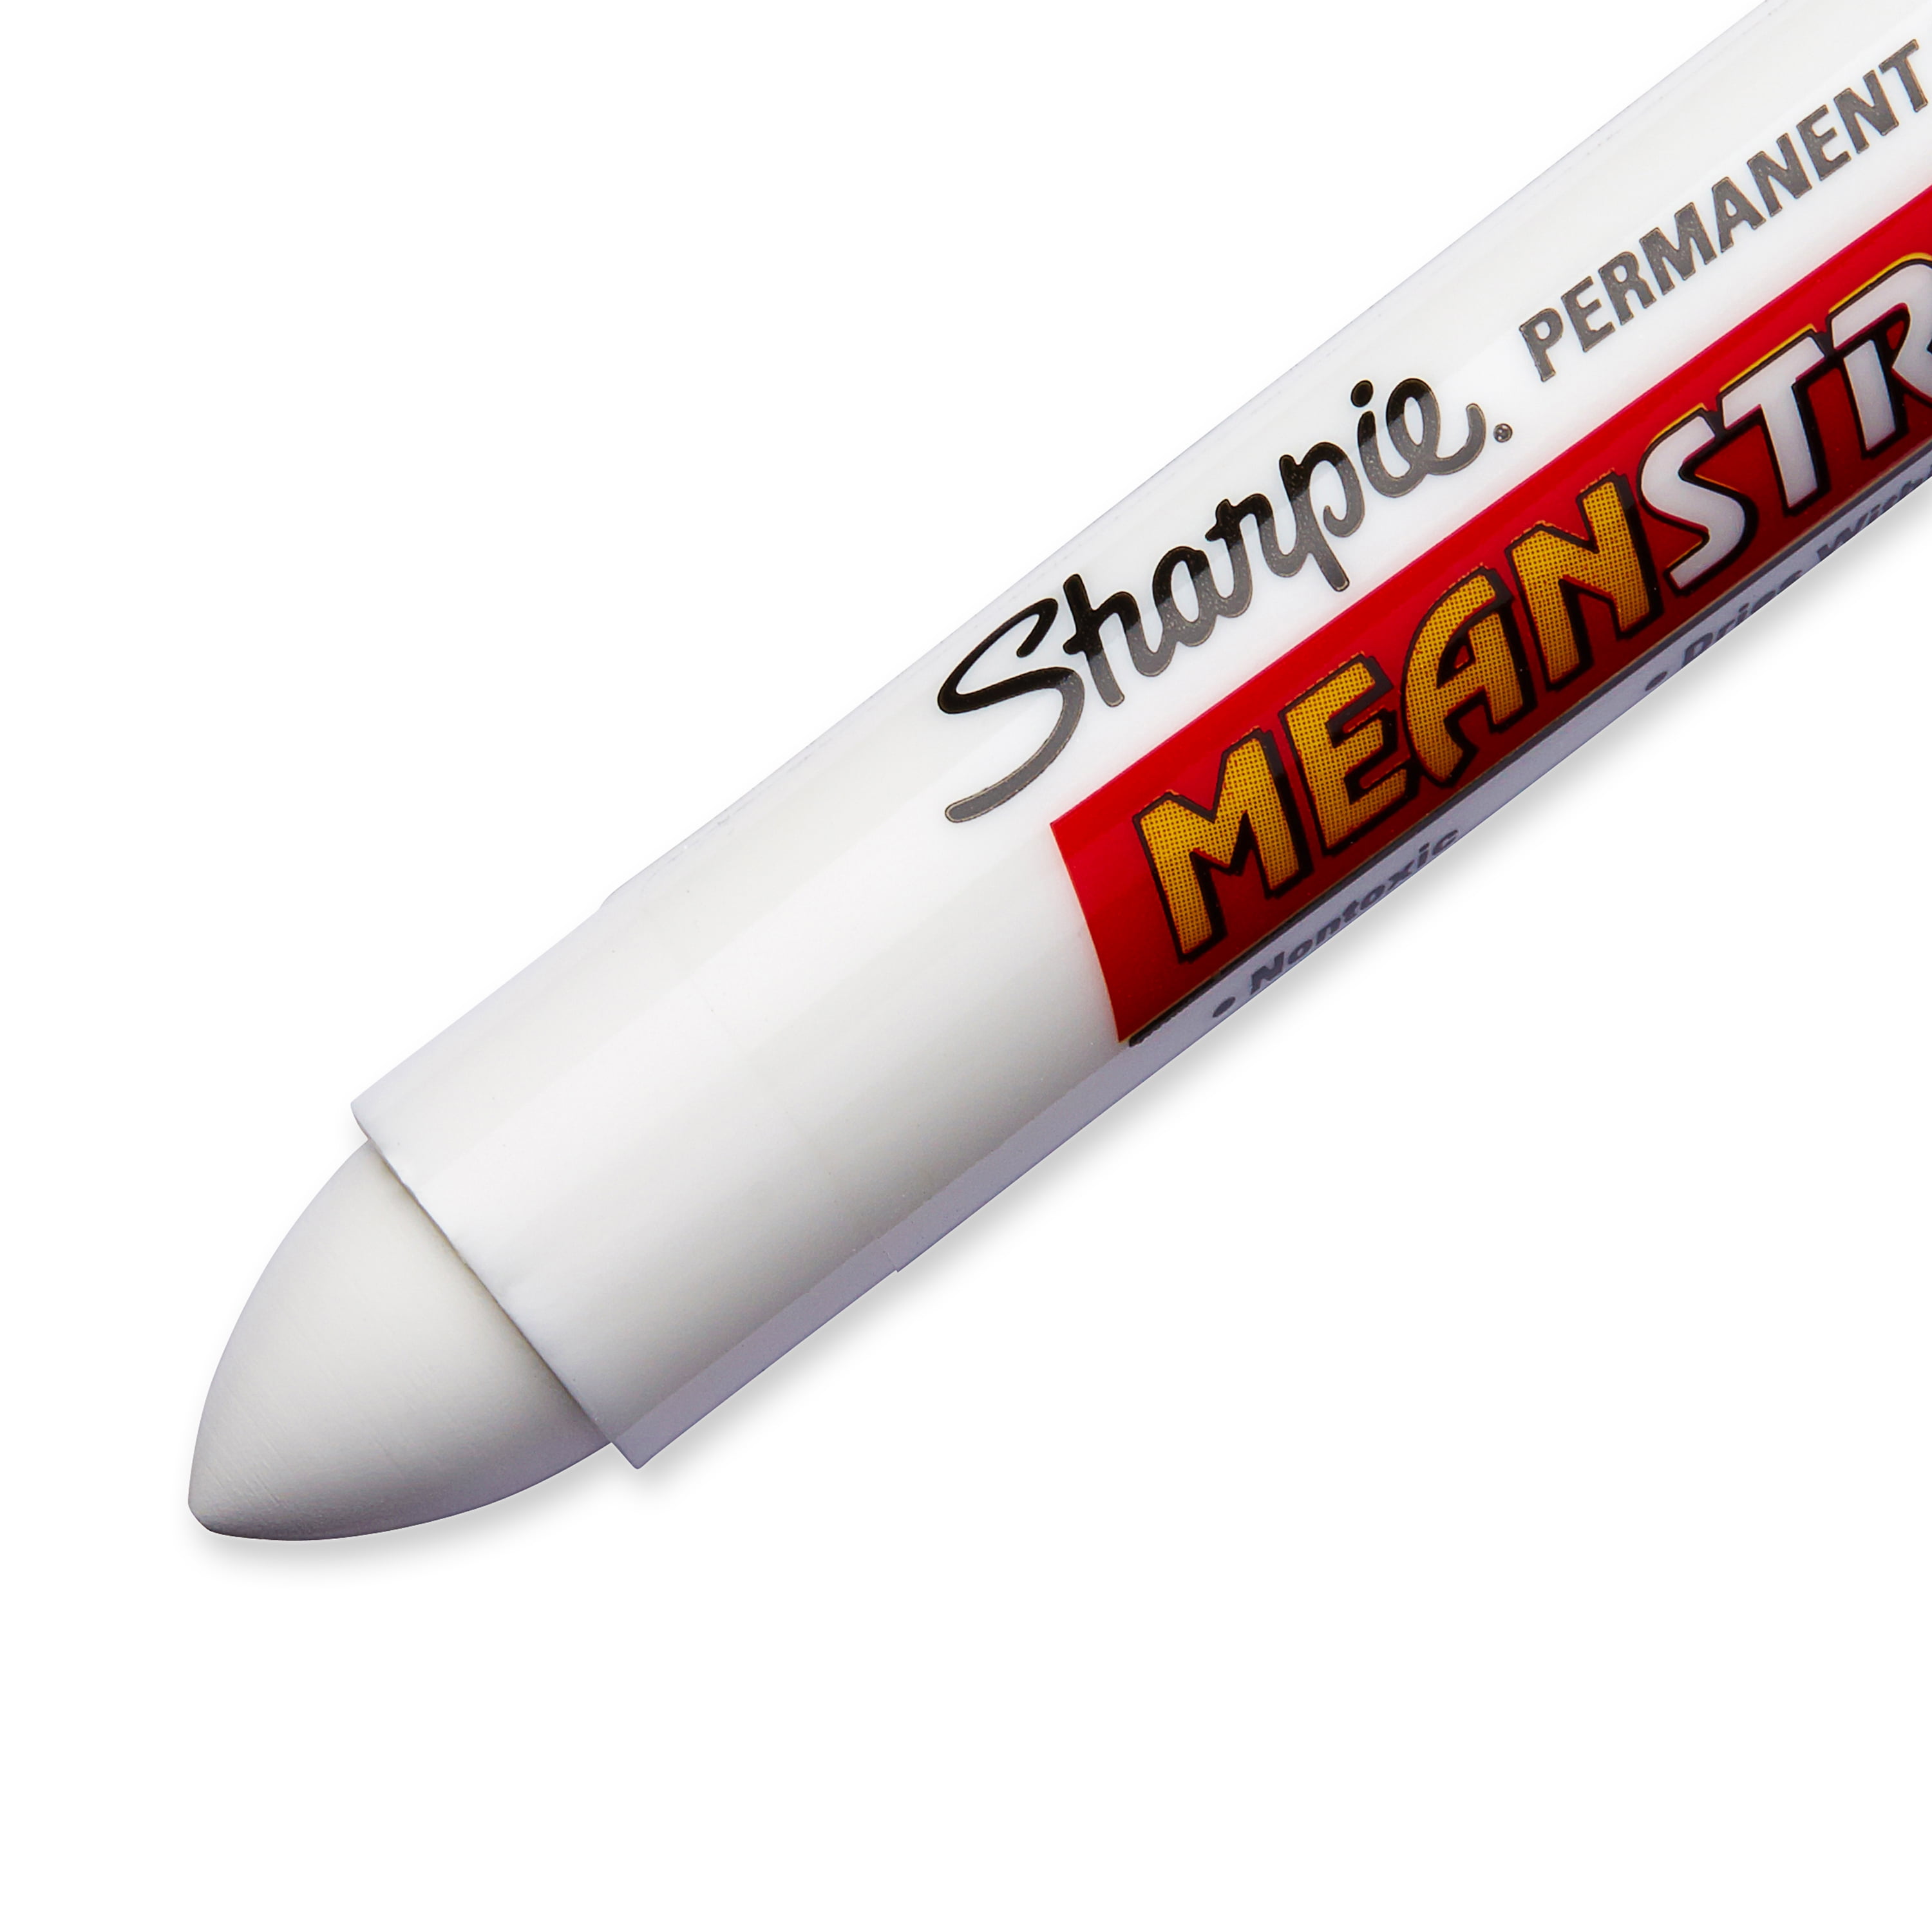 This Sharpie marker is actually a vape (compred to normal one) : r